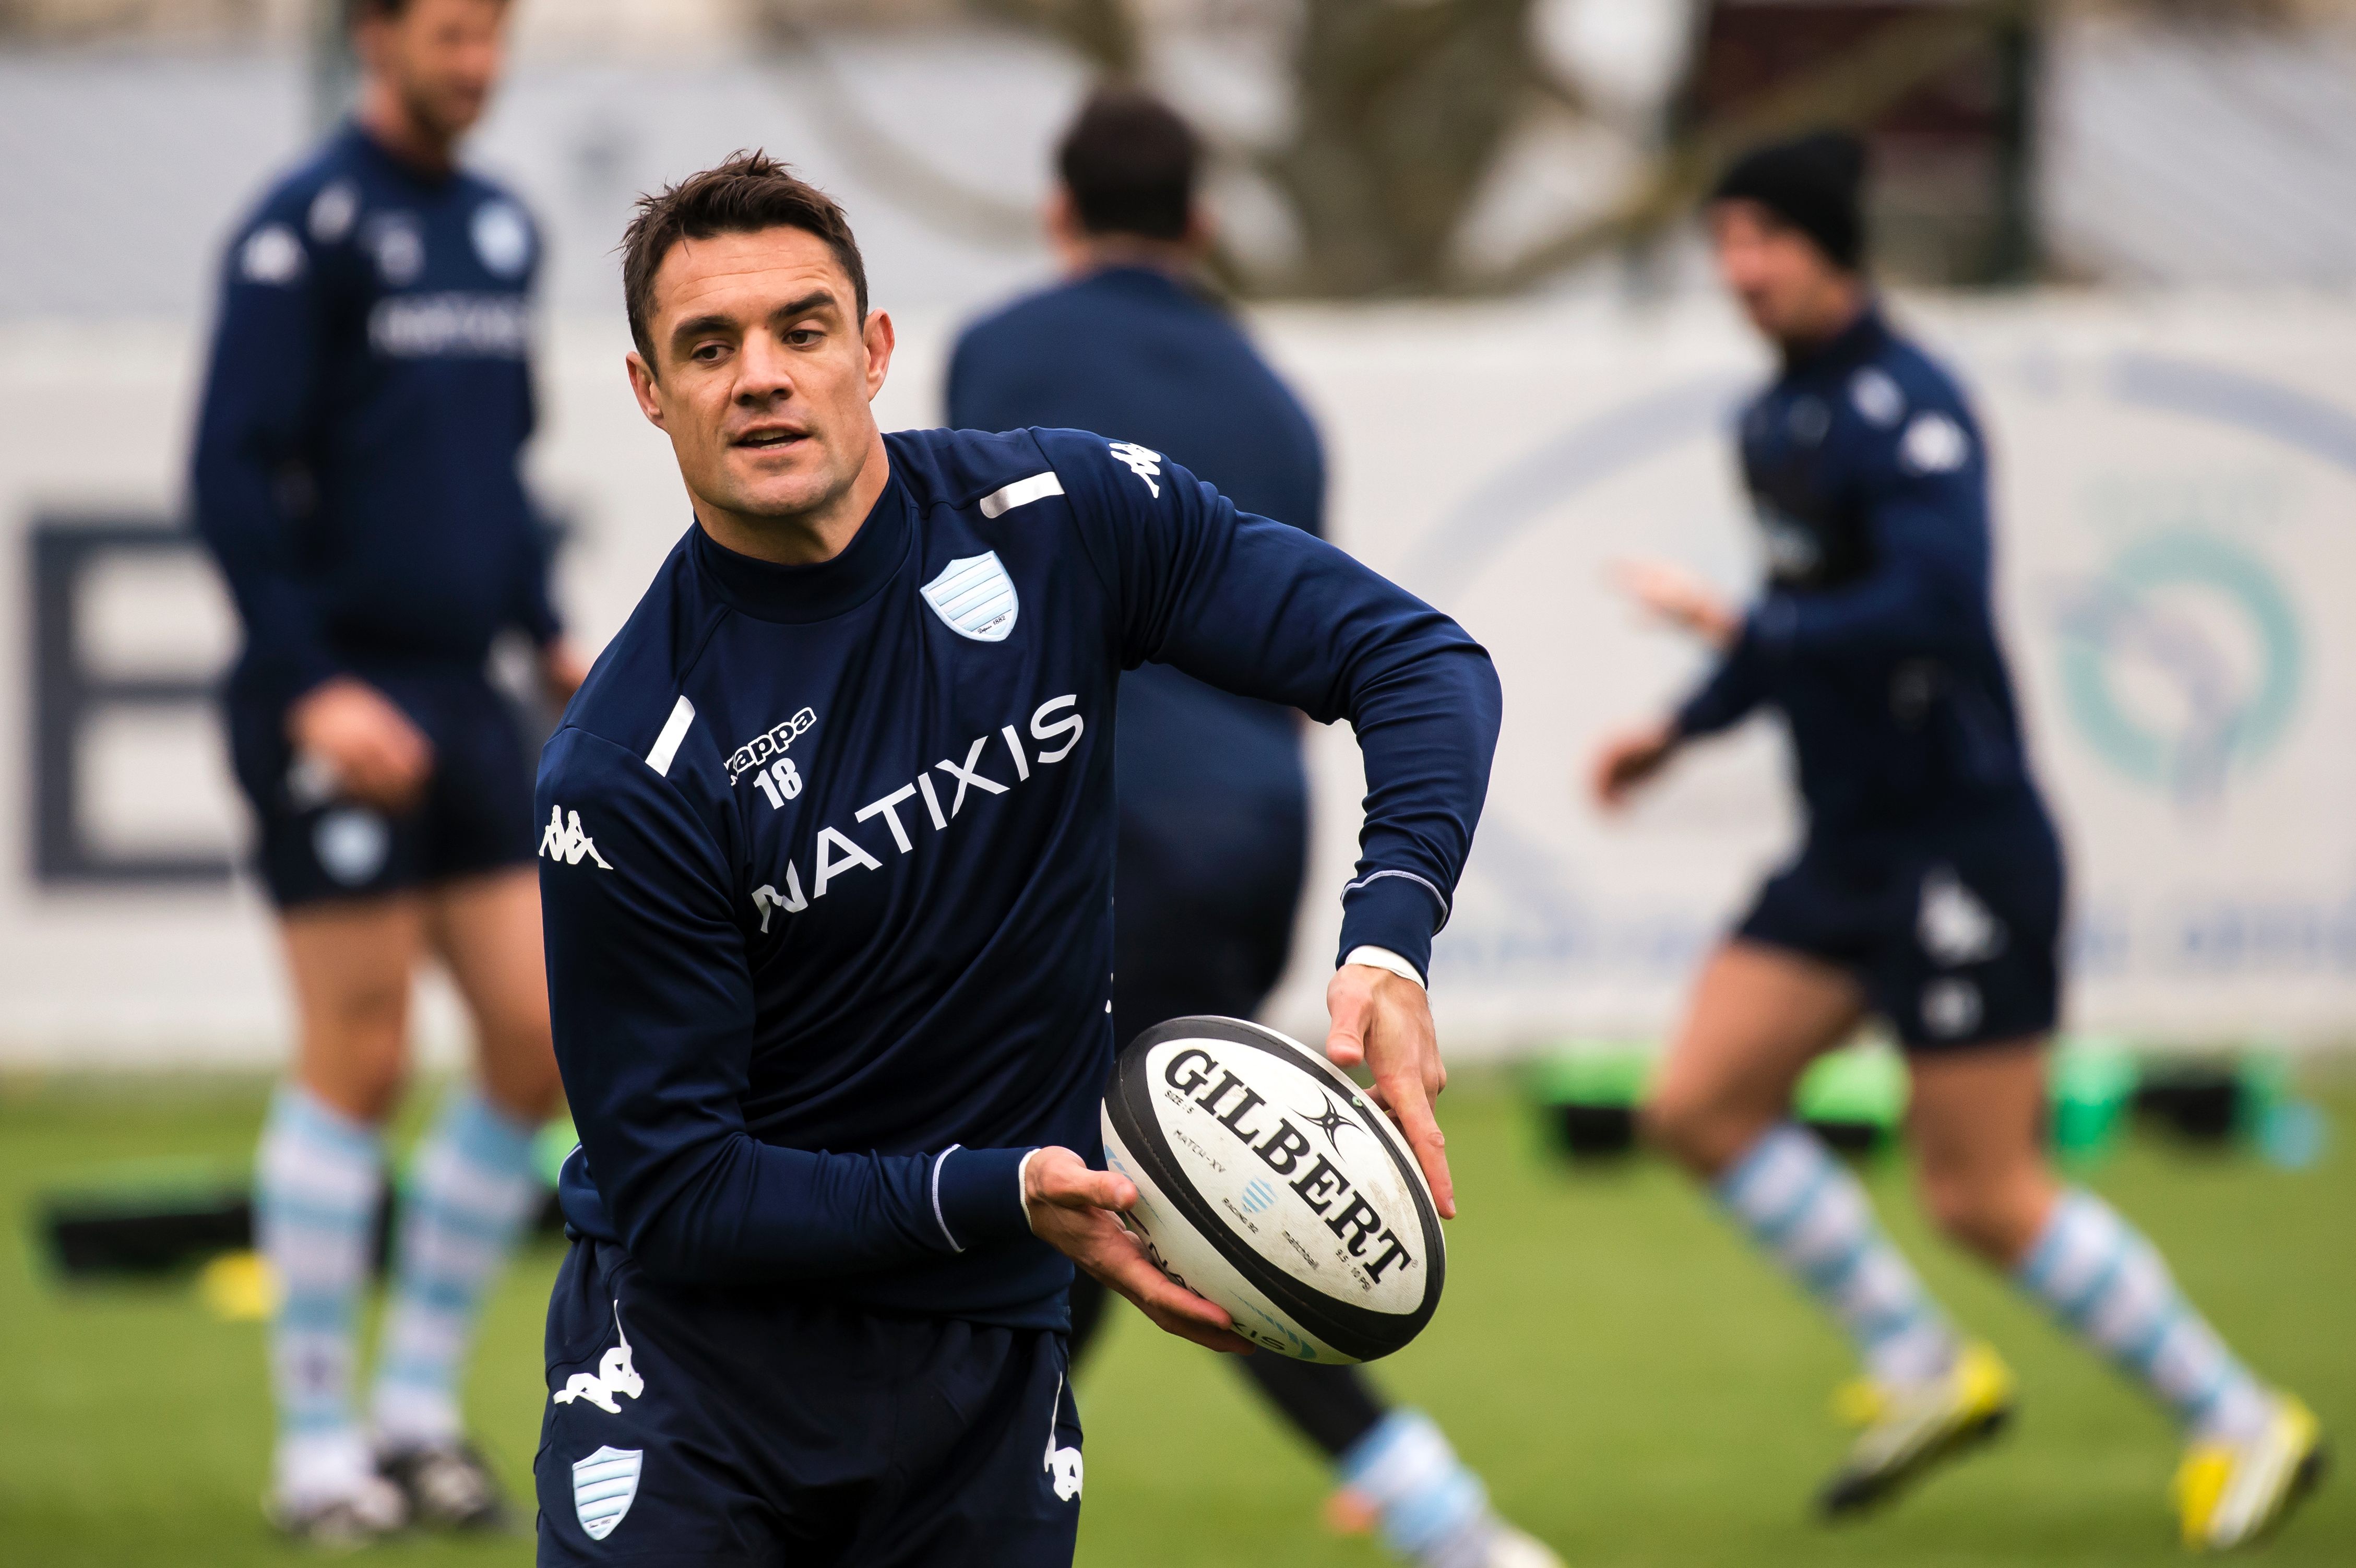 Dan Carter, whom many regard as the game's best fly-half, works out in Paris with his Racing 92 team-mates. Photo: AFP